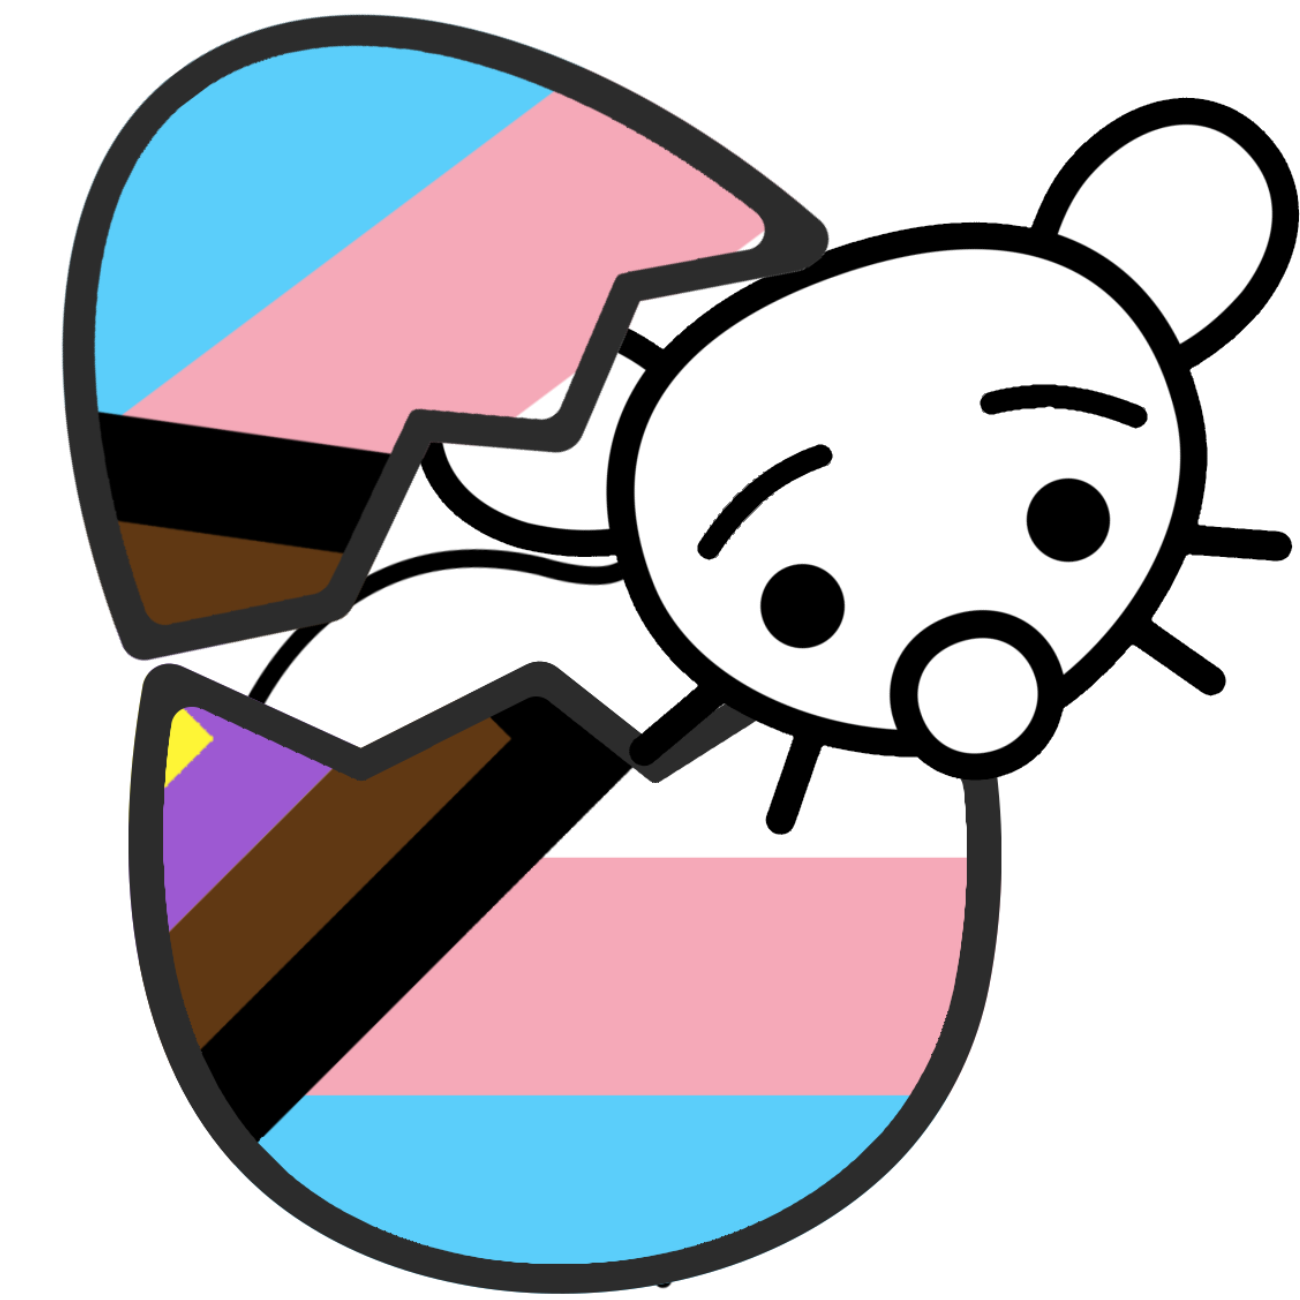 egg_irl — Memes about being trans people in denial and other eggy topics